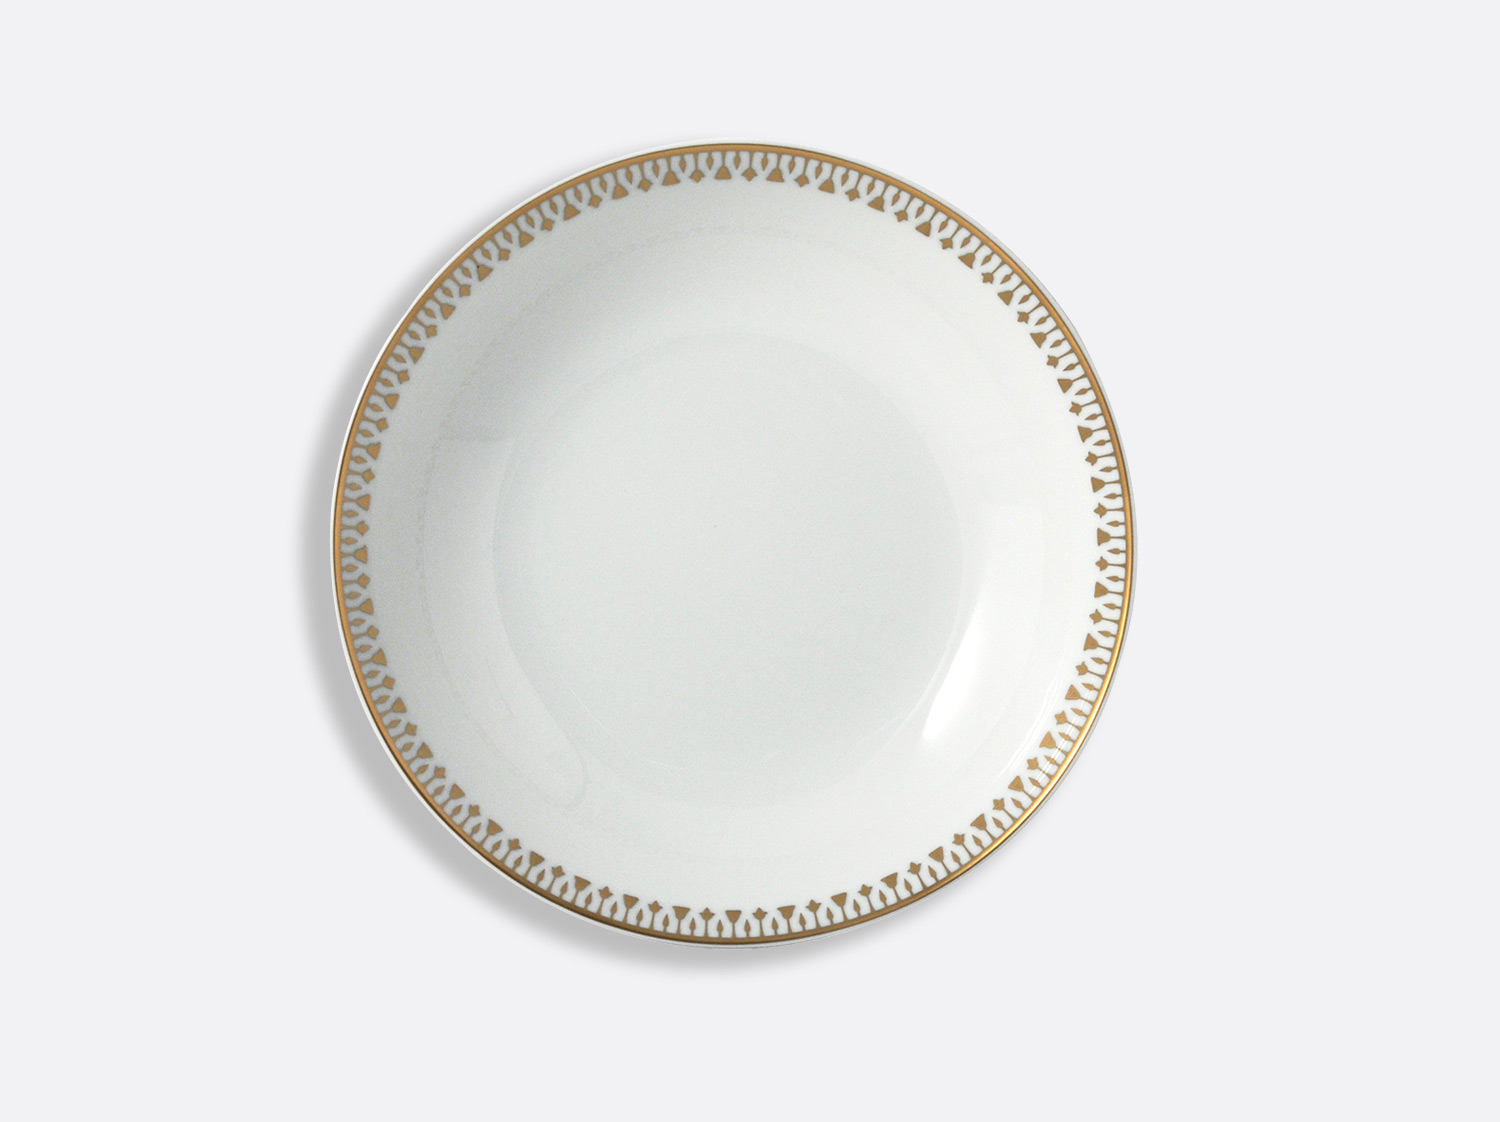 China coupe soup 7.5" of the collection Soleil levant | Bernardaud